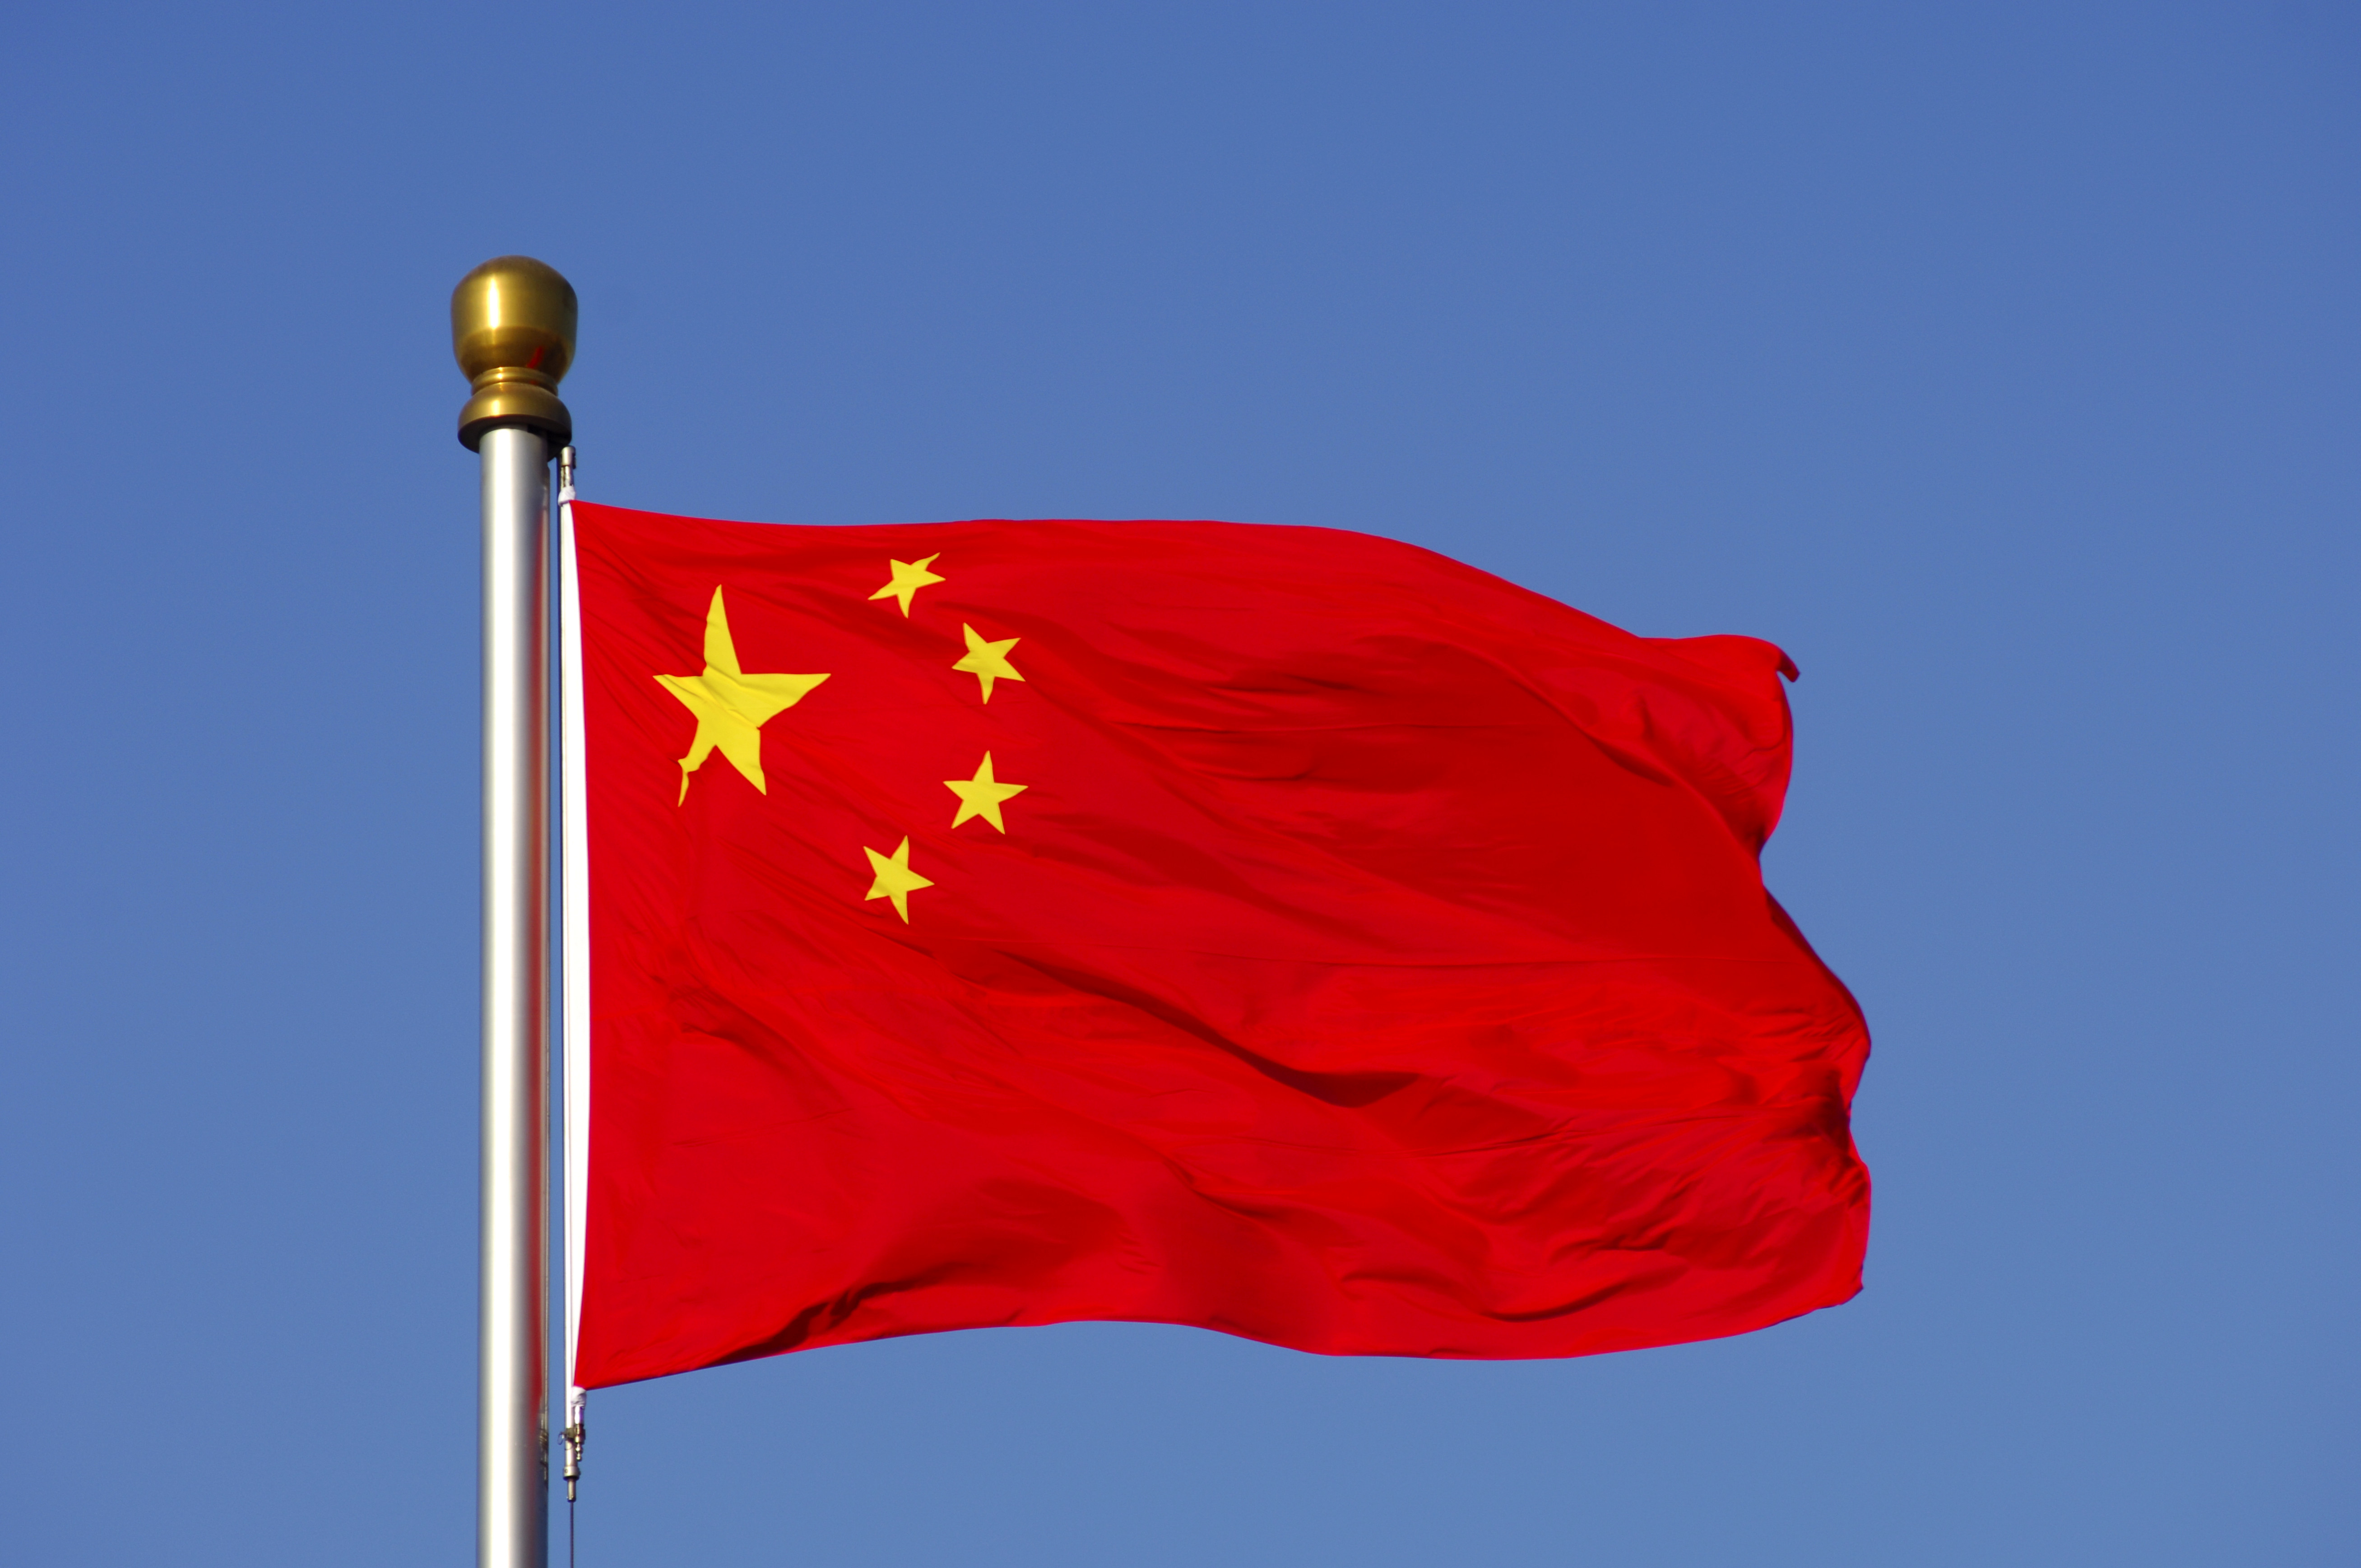 /content/dam/vow-assets/voice-of-wealth/flag-china-3-740x400.jpg